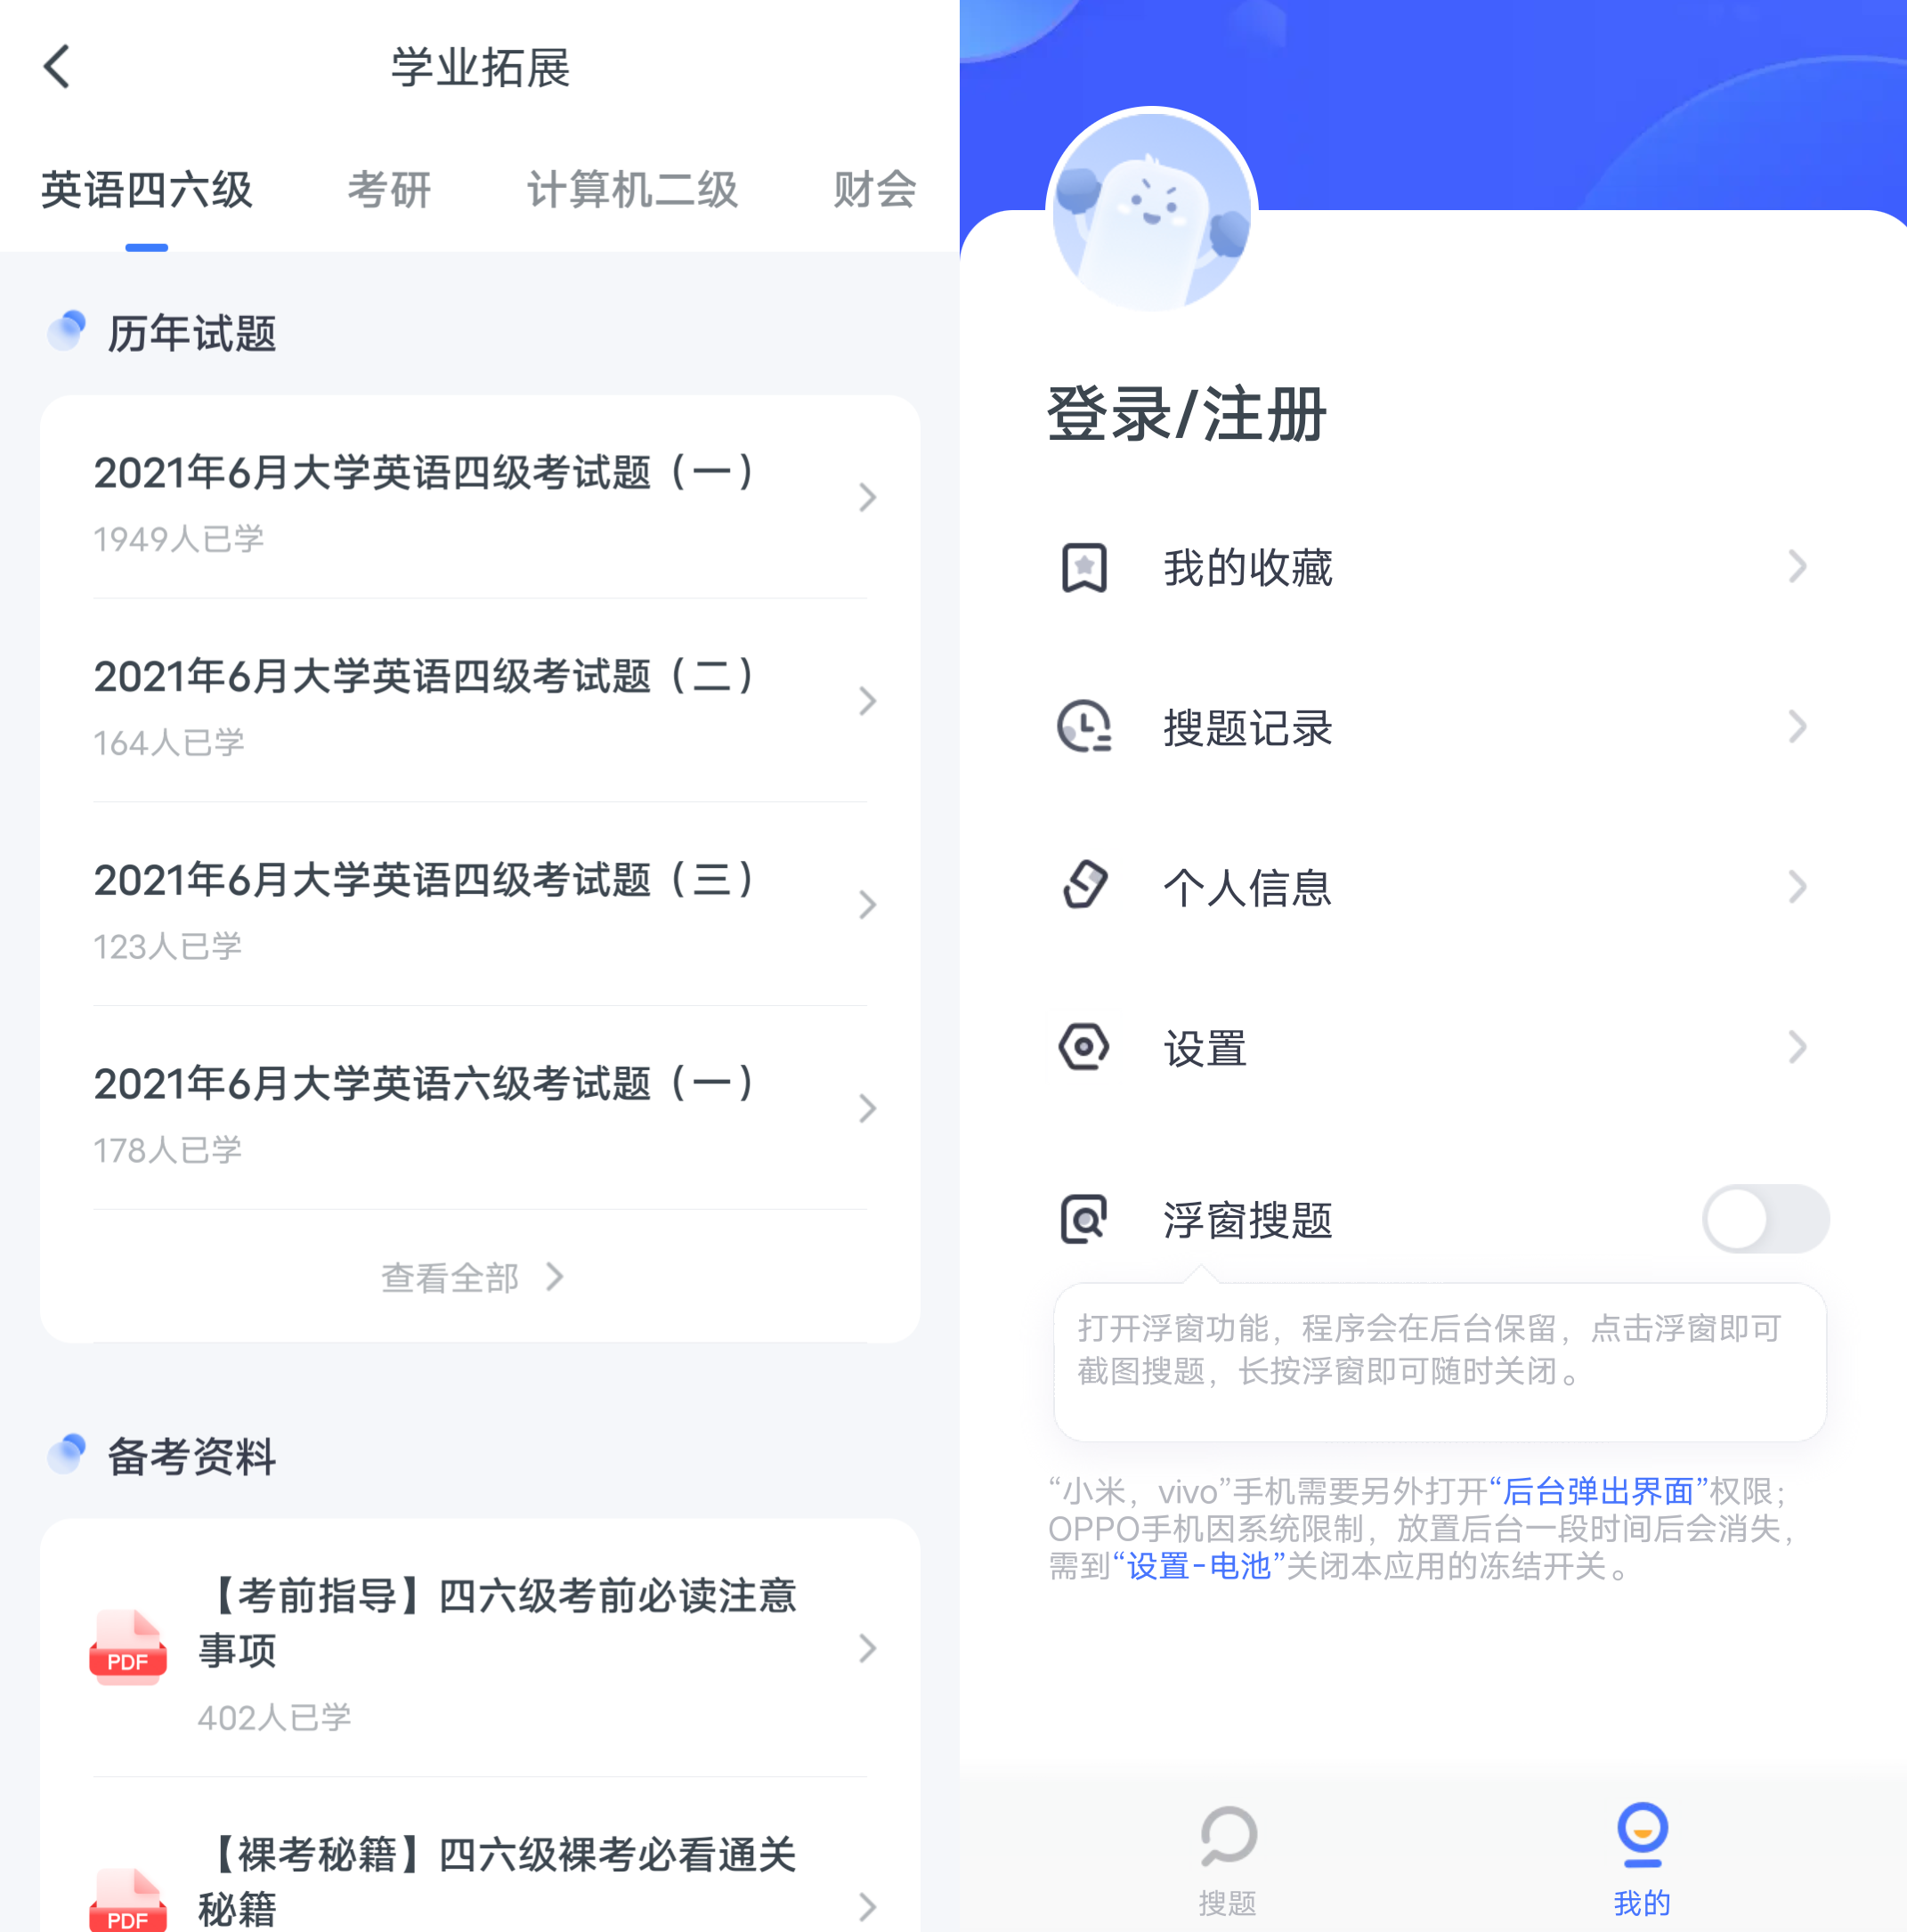 Android 火星搜题_v1.2.17